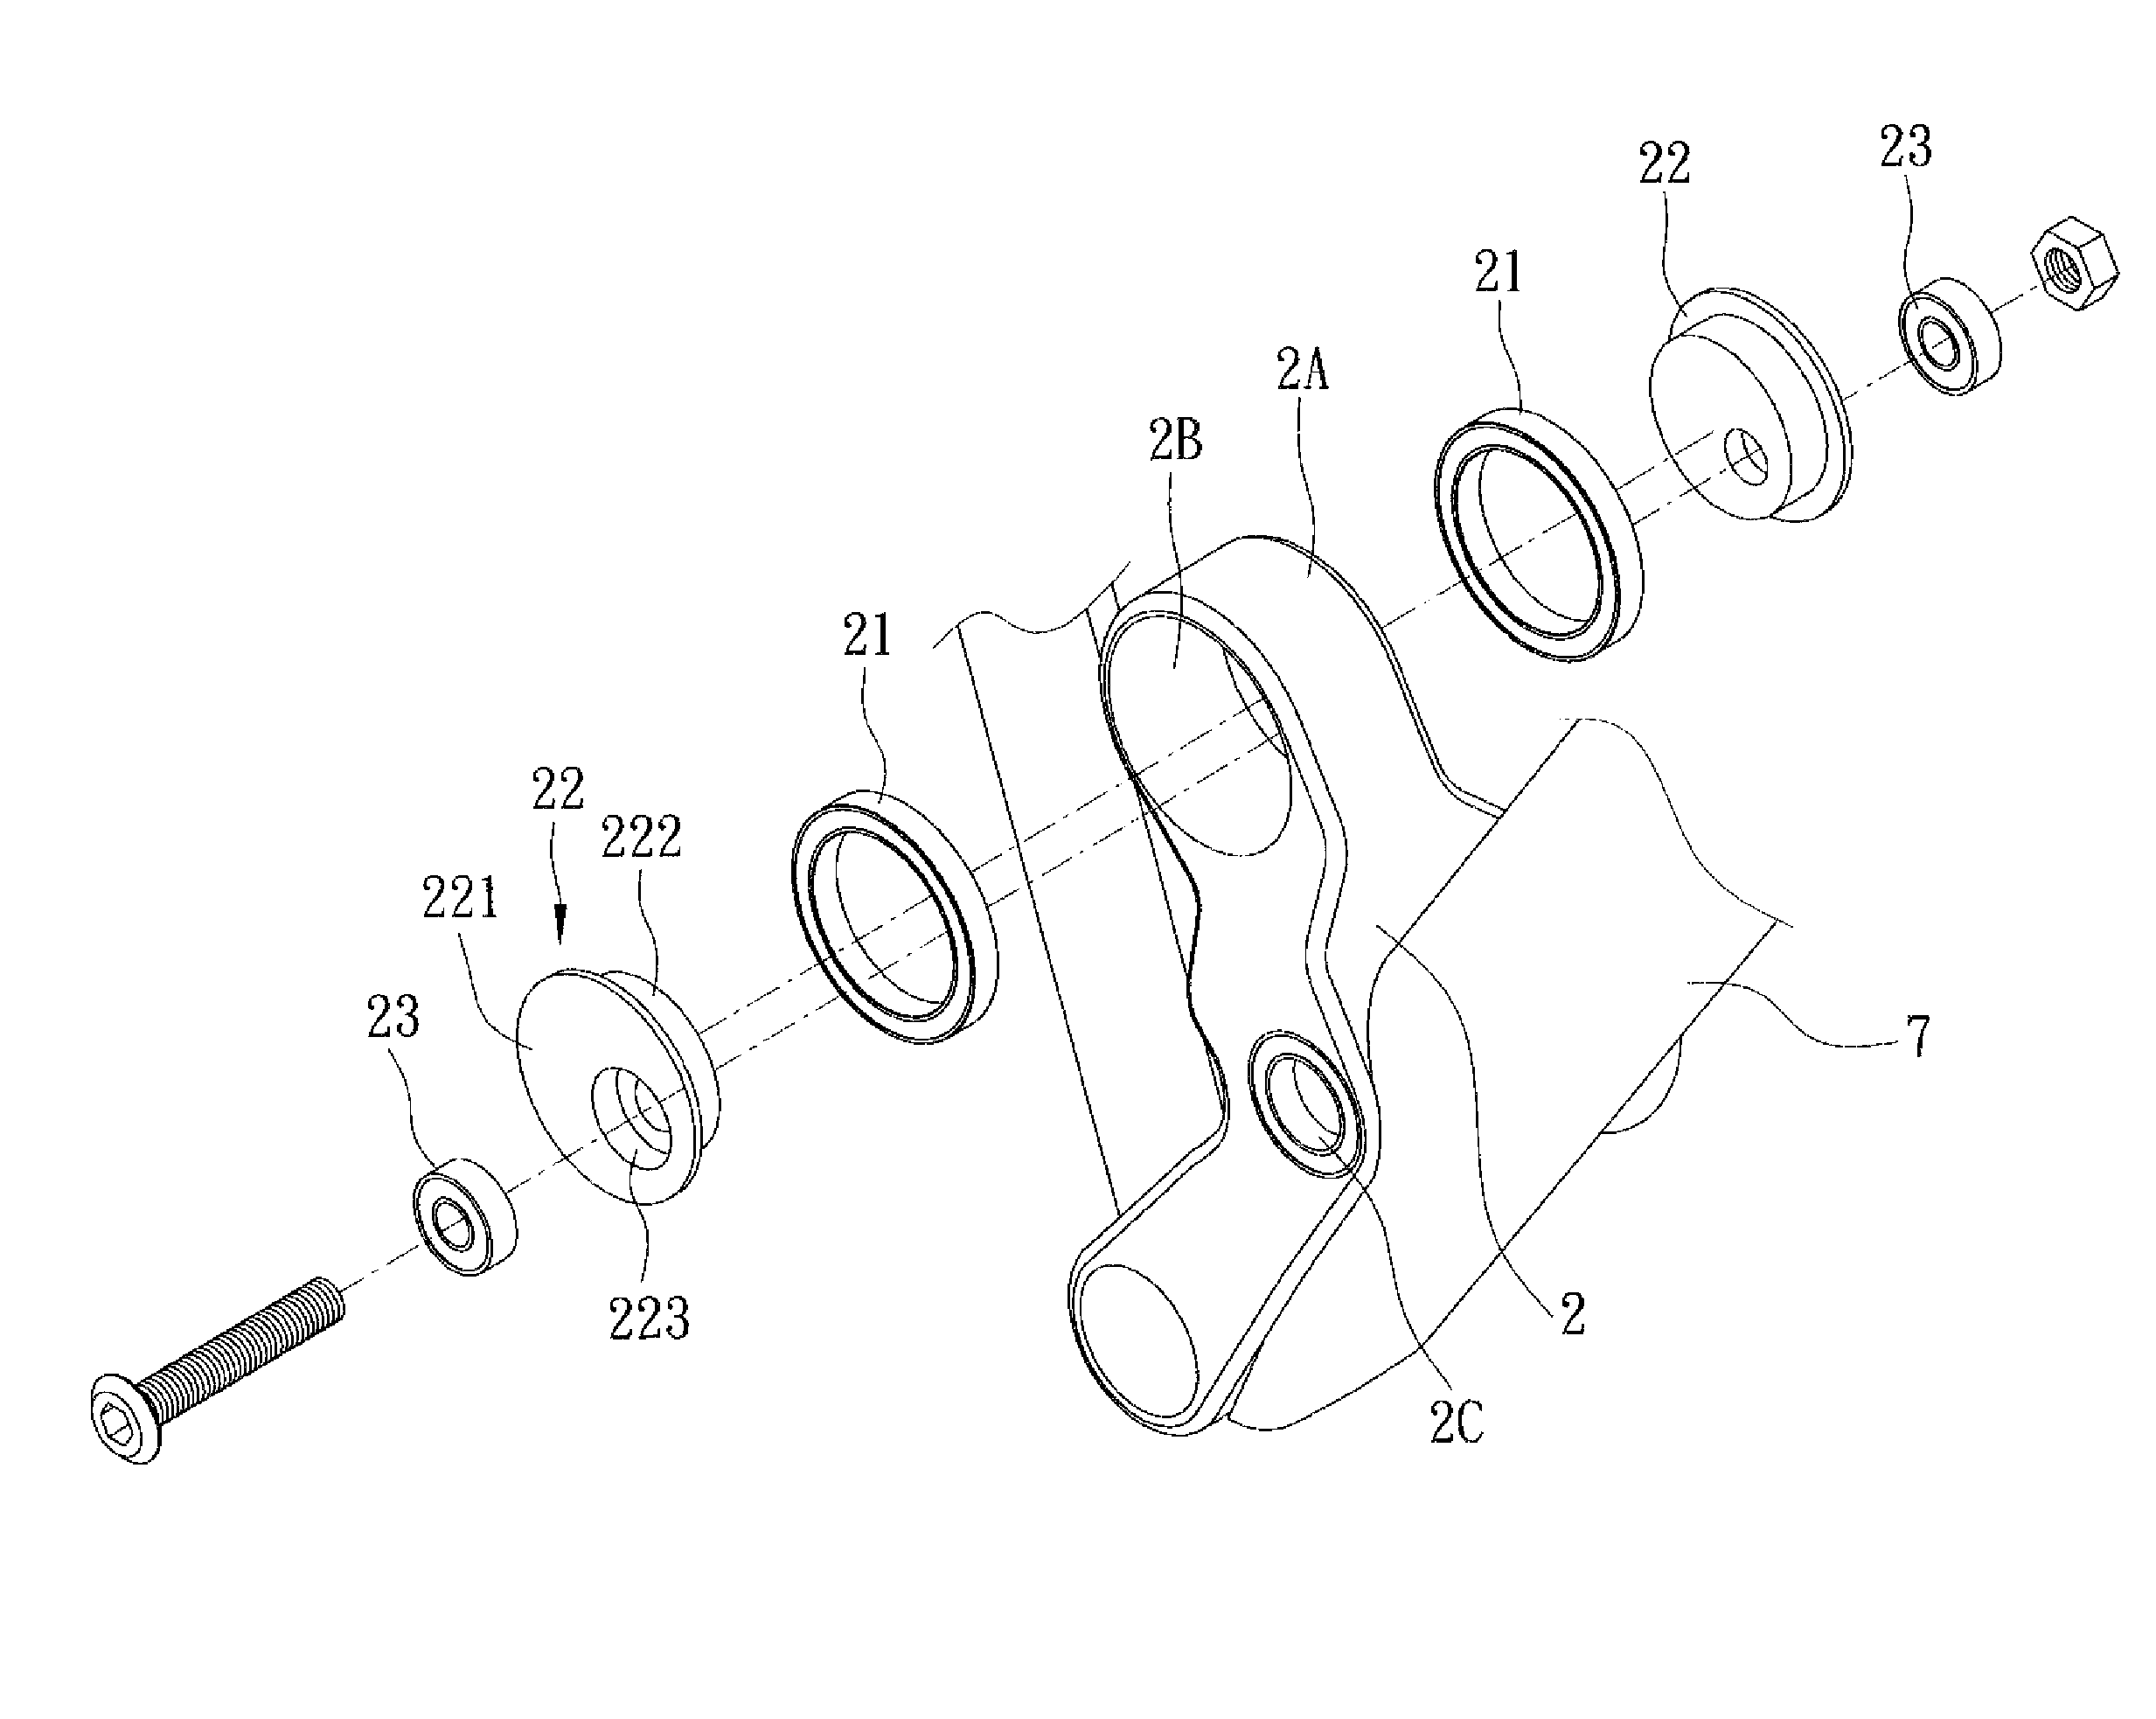 Bicycle rear suspension system